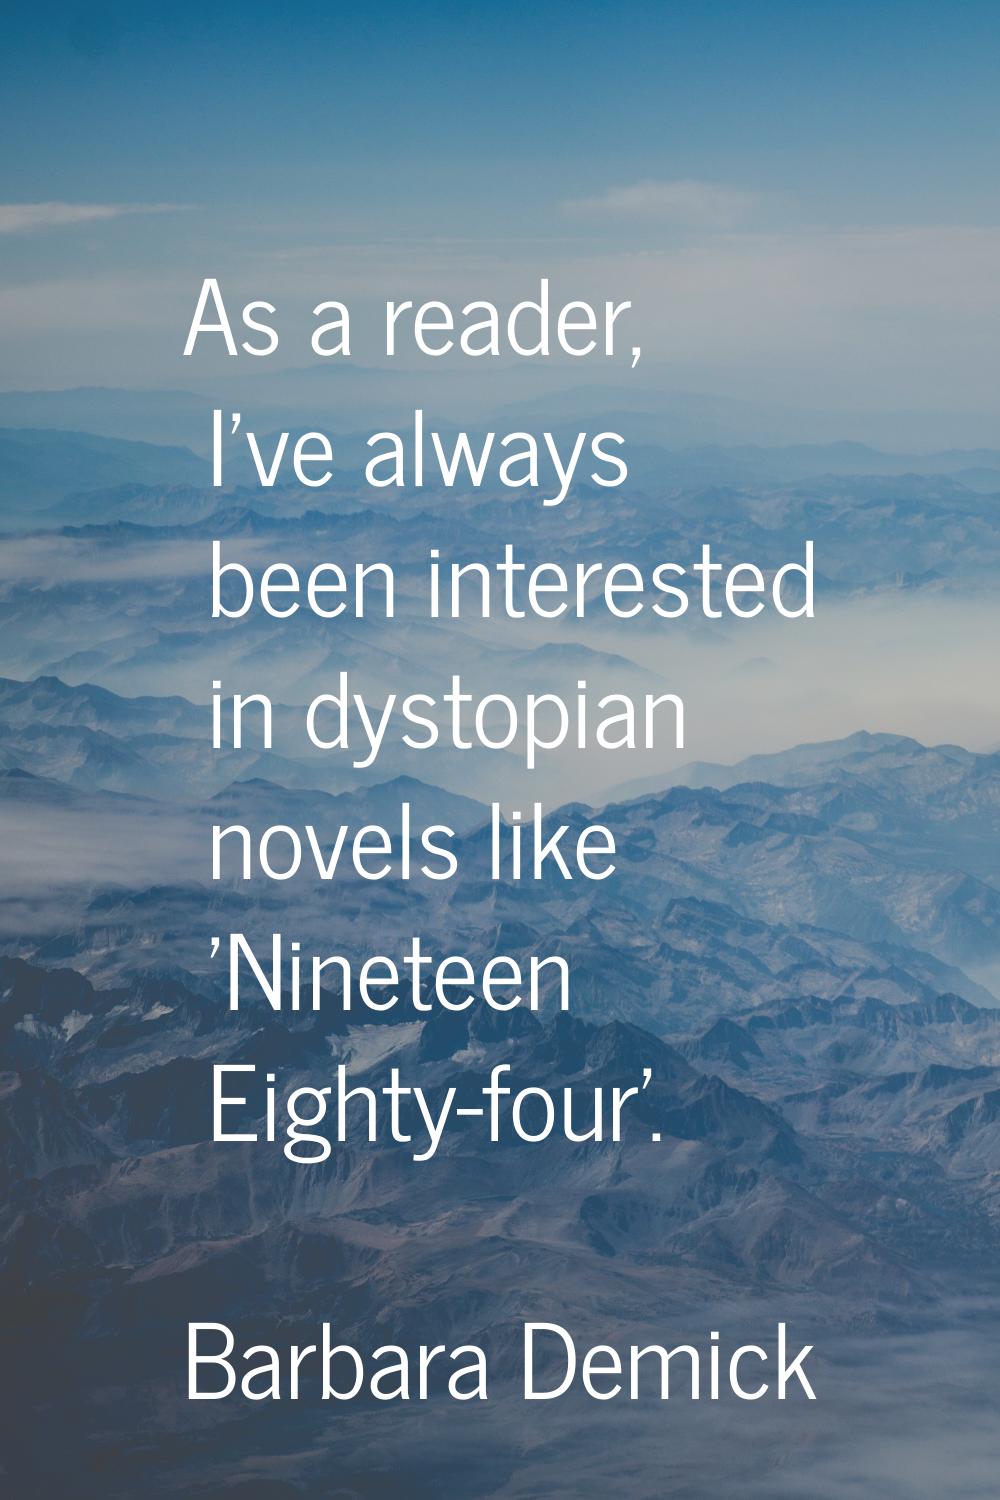 As a reader, I've always been interested in dystopian novels like 'Nineteen Eighty-four'.